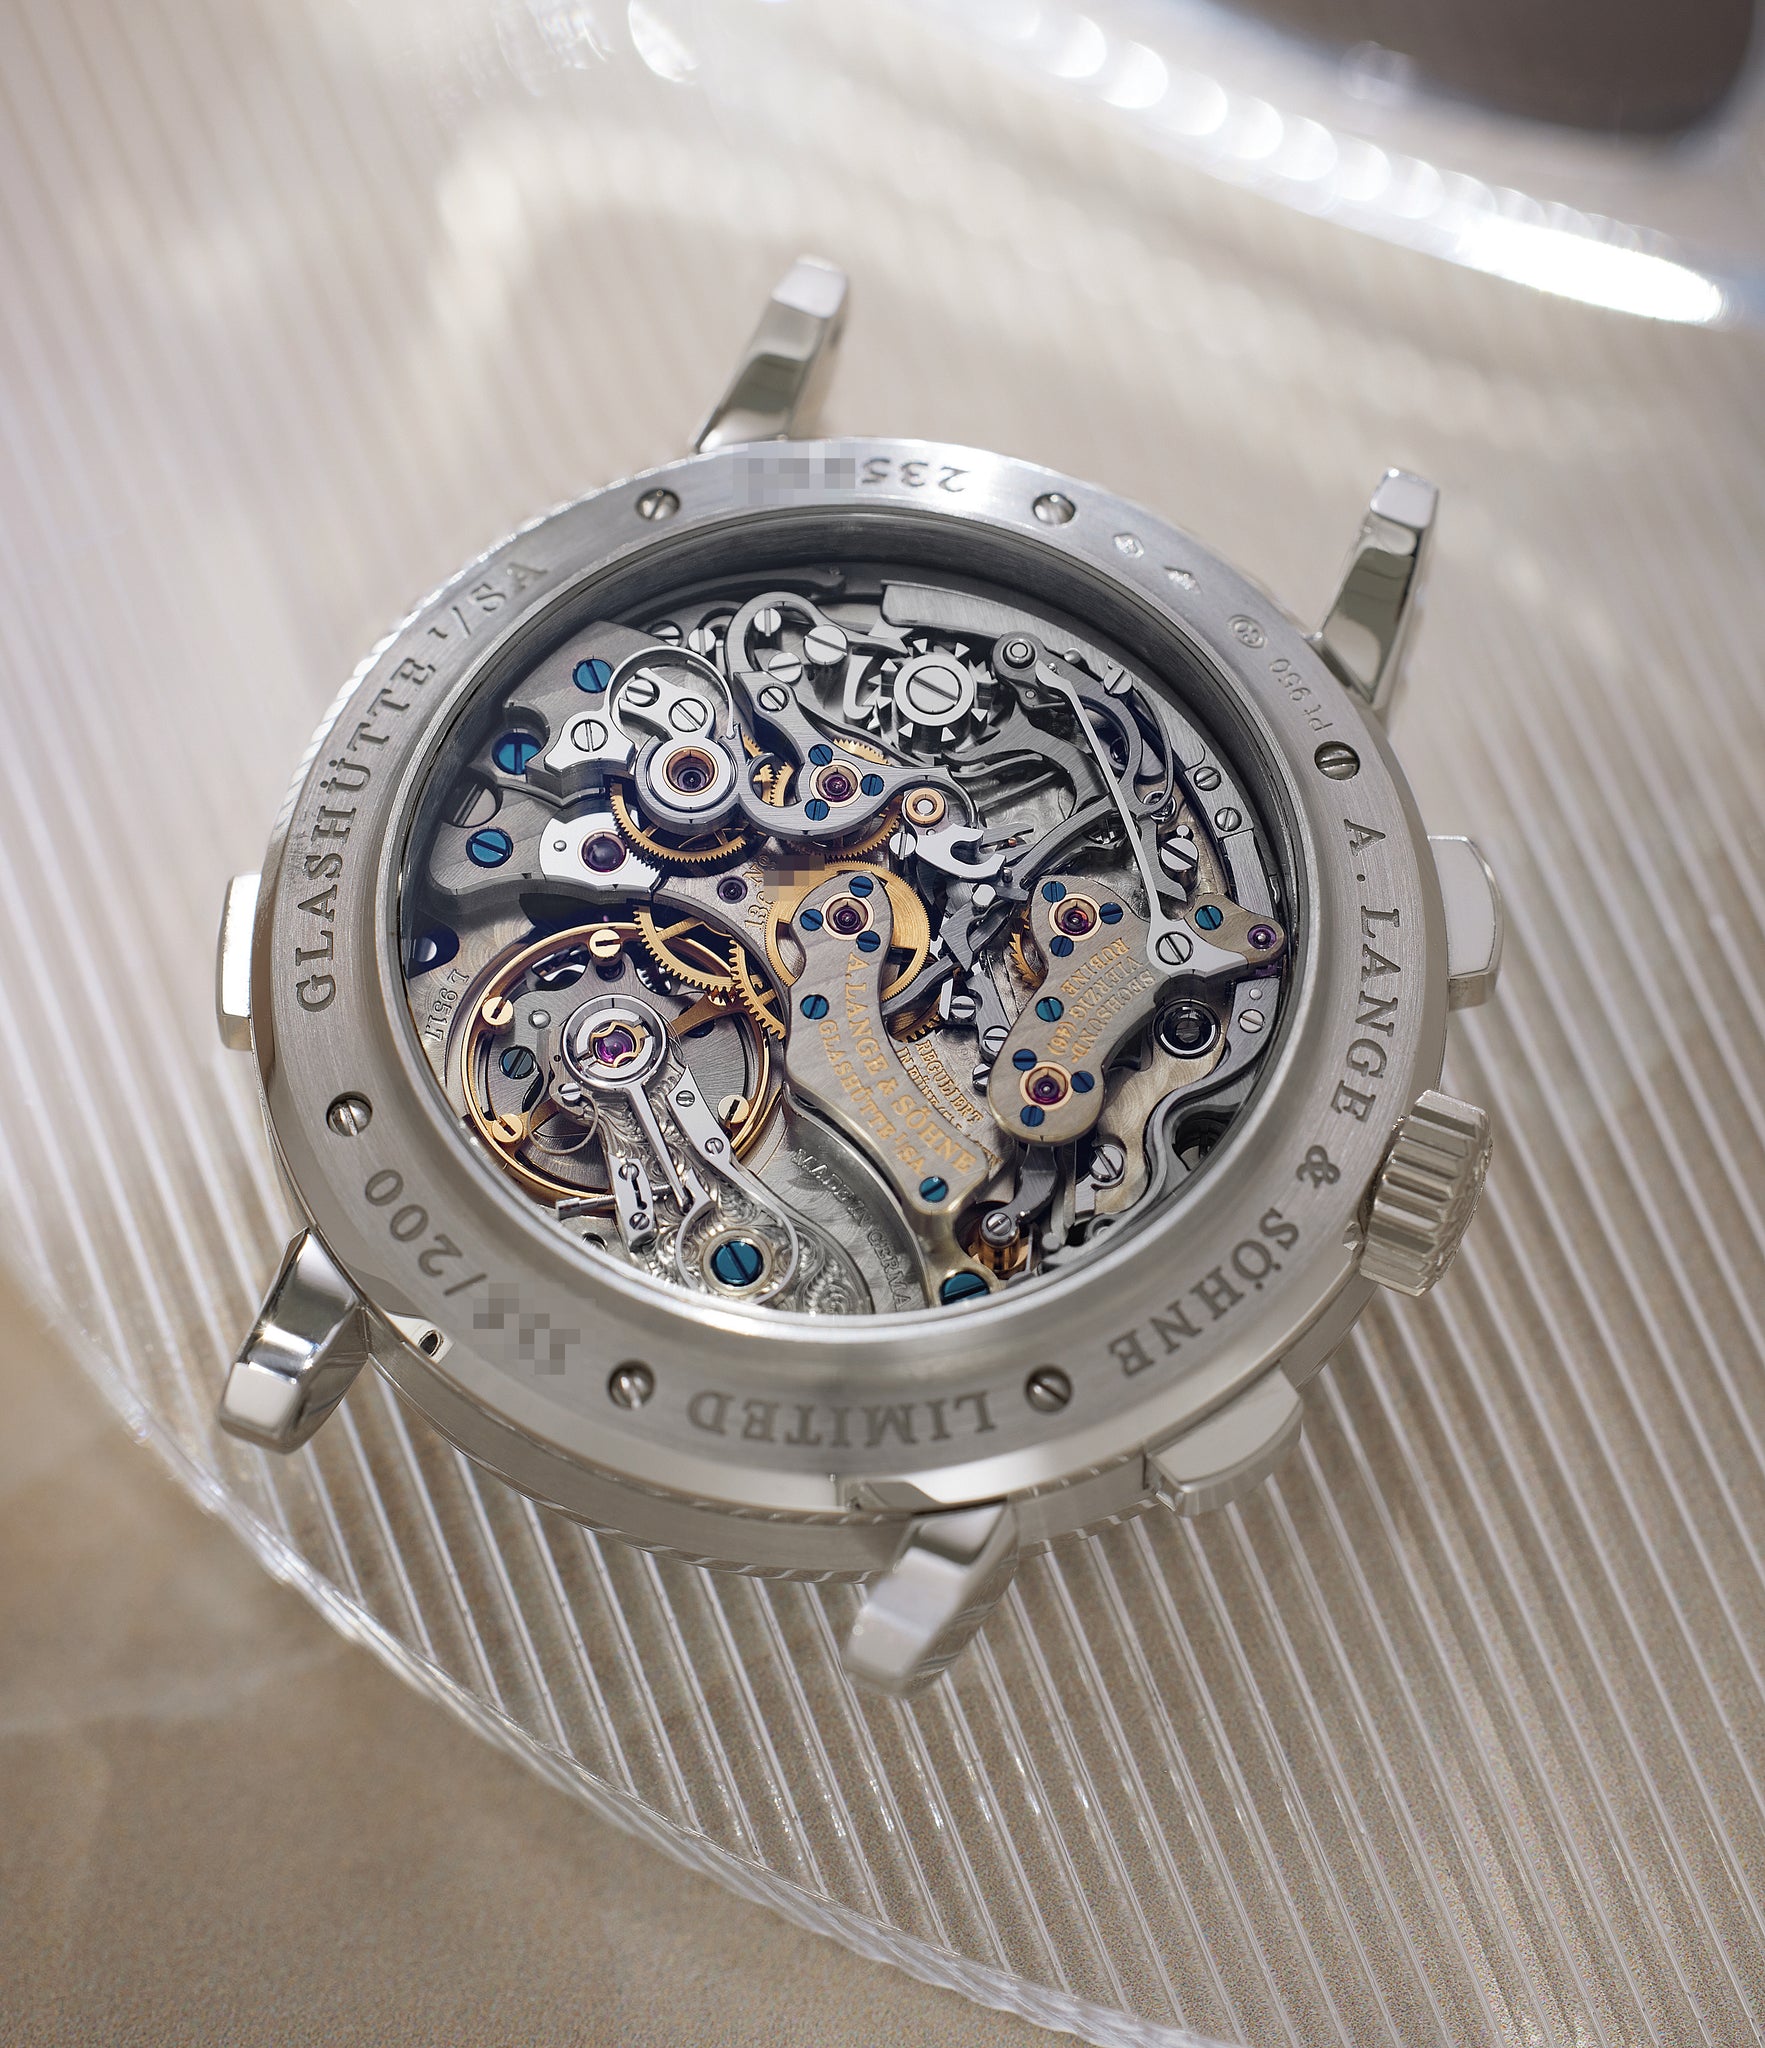 caseback A. Lange & Söhne Datograph Up/Down Lumen 405.034 Platinum preowned watch at A Collected Man London